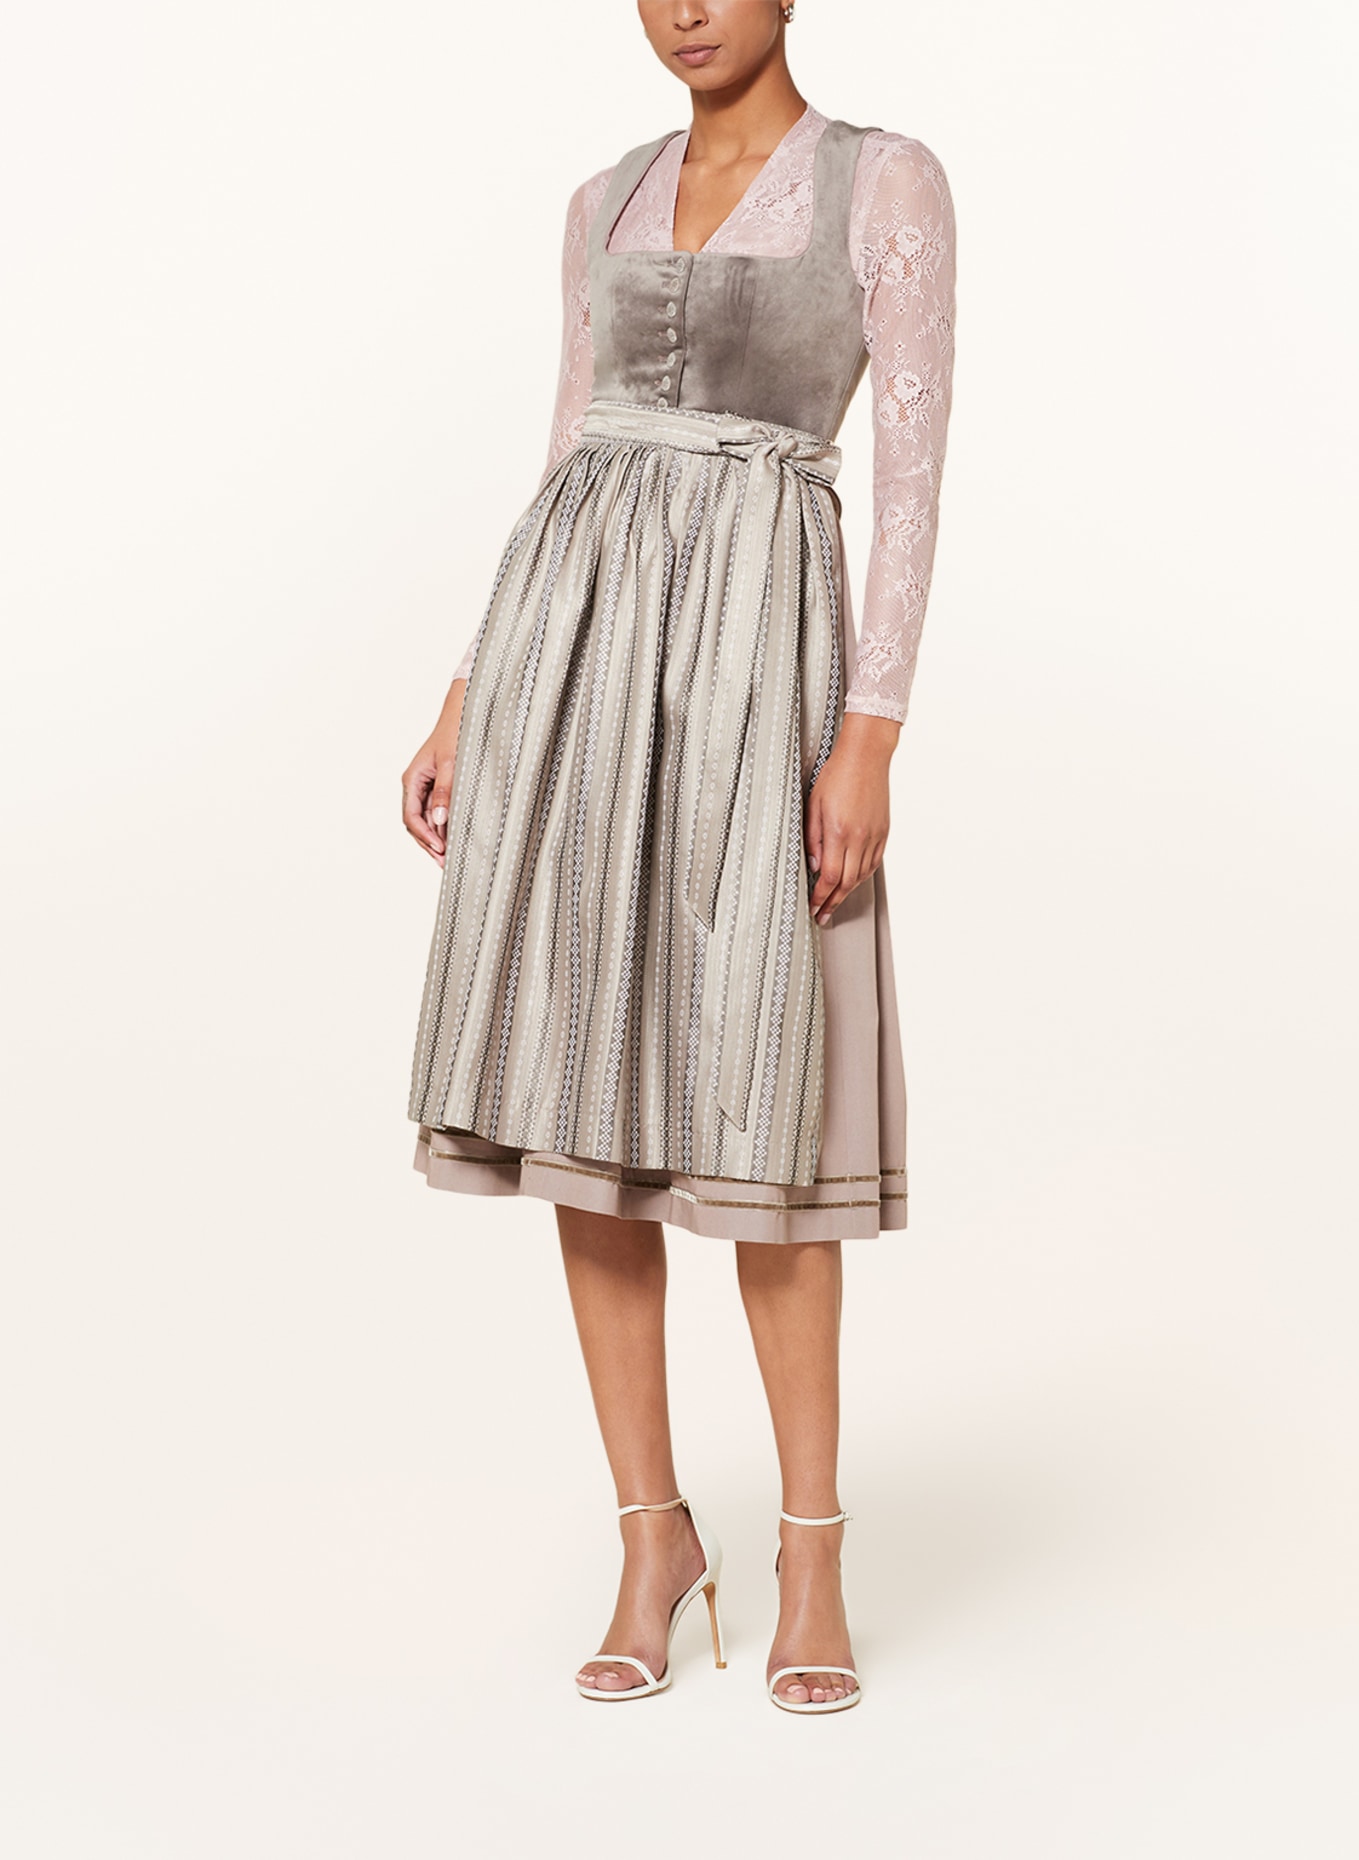 BERWIN & WOLFF Dirndl blouse made of lace, Color: ROSE (Image 4)